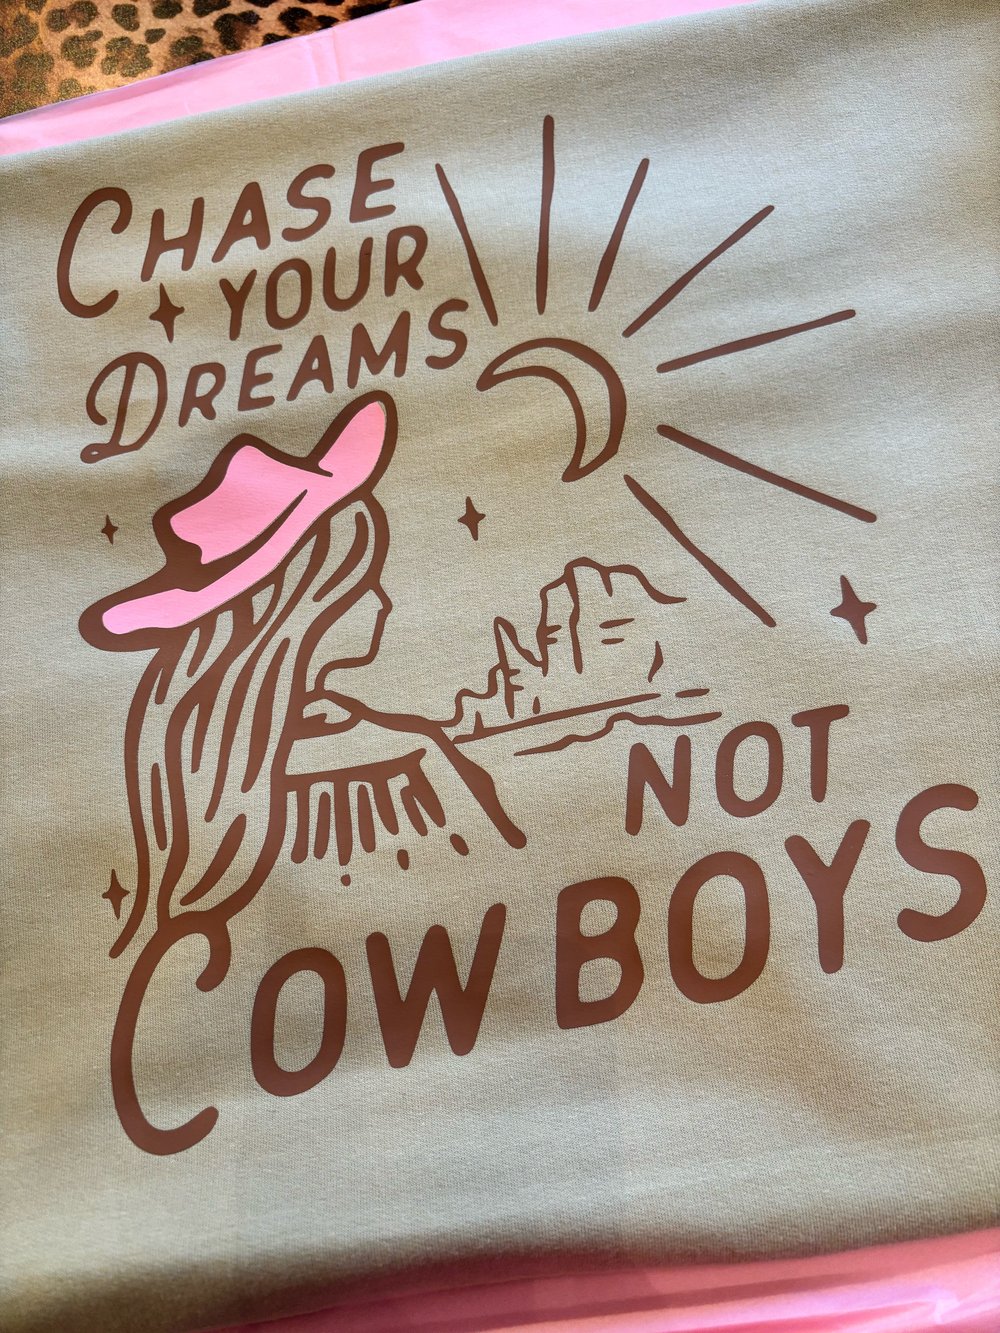 Image of Chase Your Dreams Not Cowboys